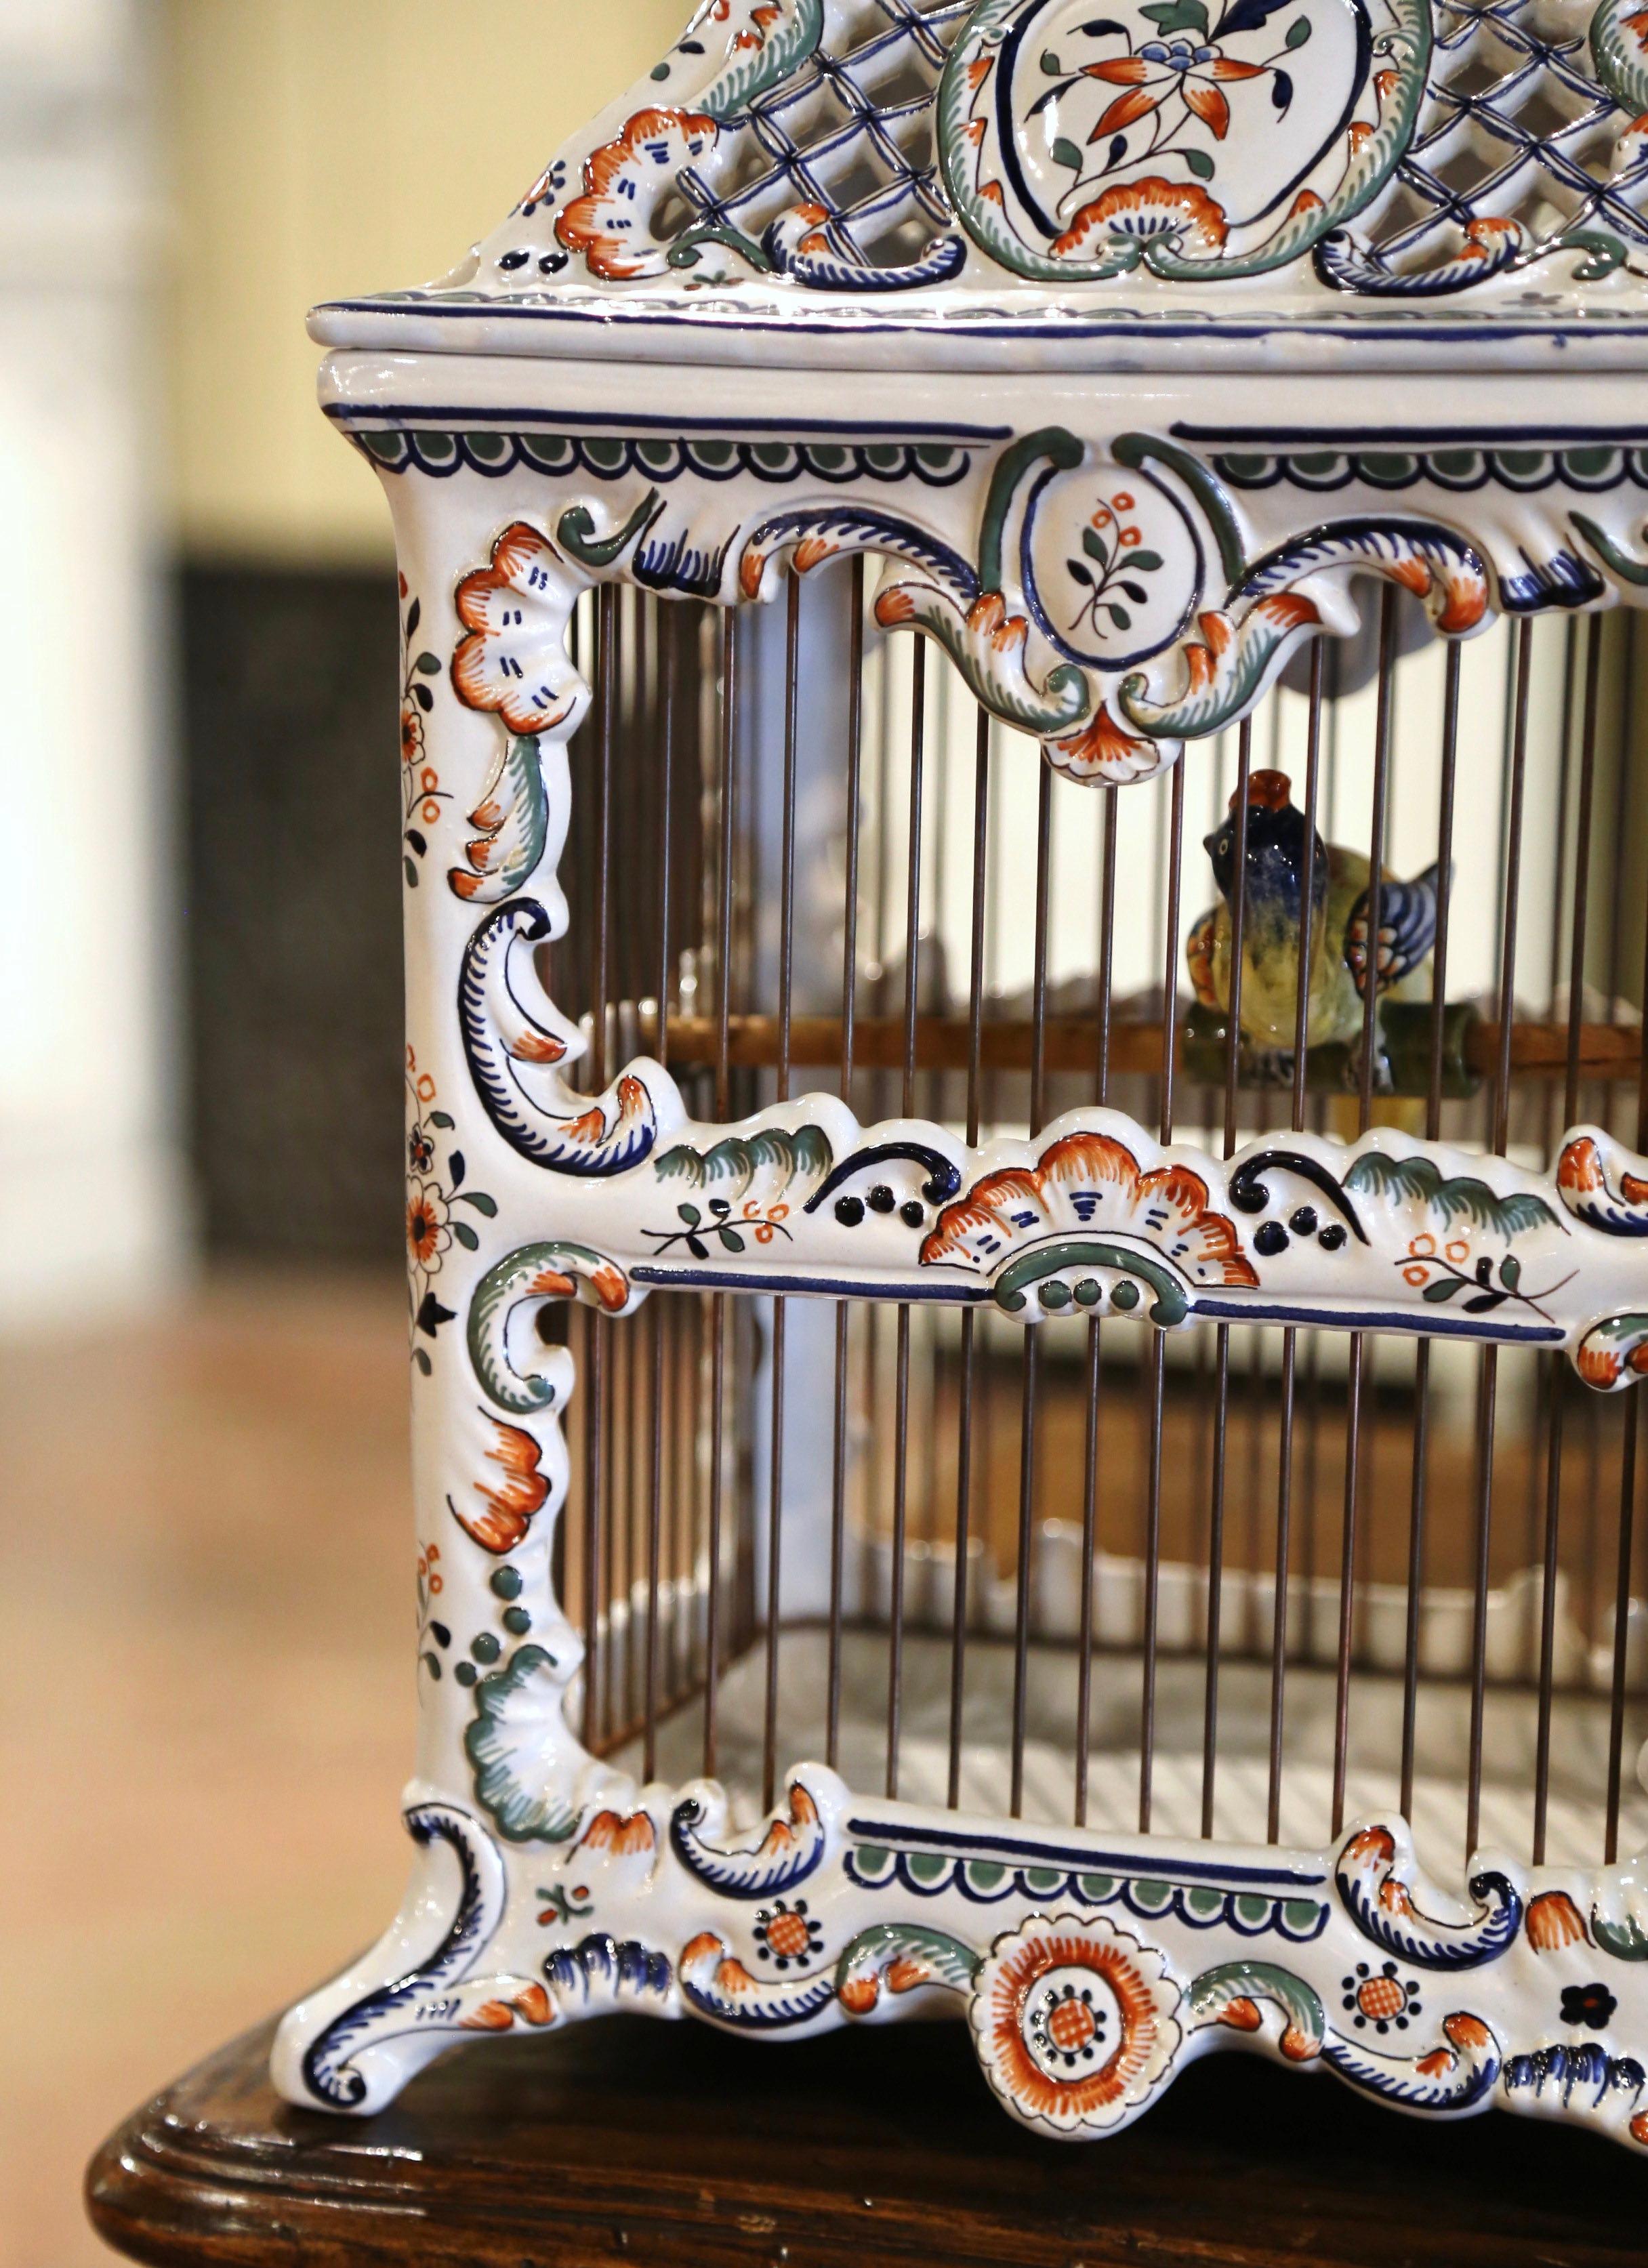 Louis XV Midcentury French Decorative Hand Painted Porcelain Birdcage from Normandy